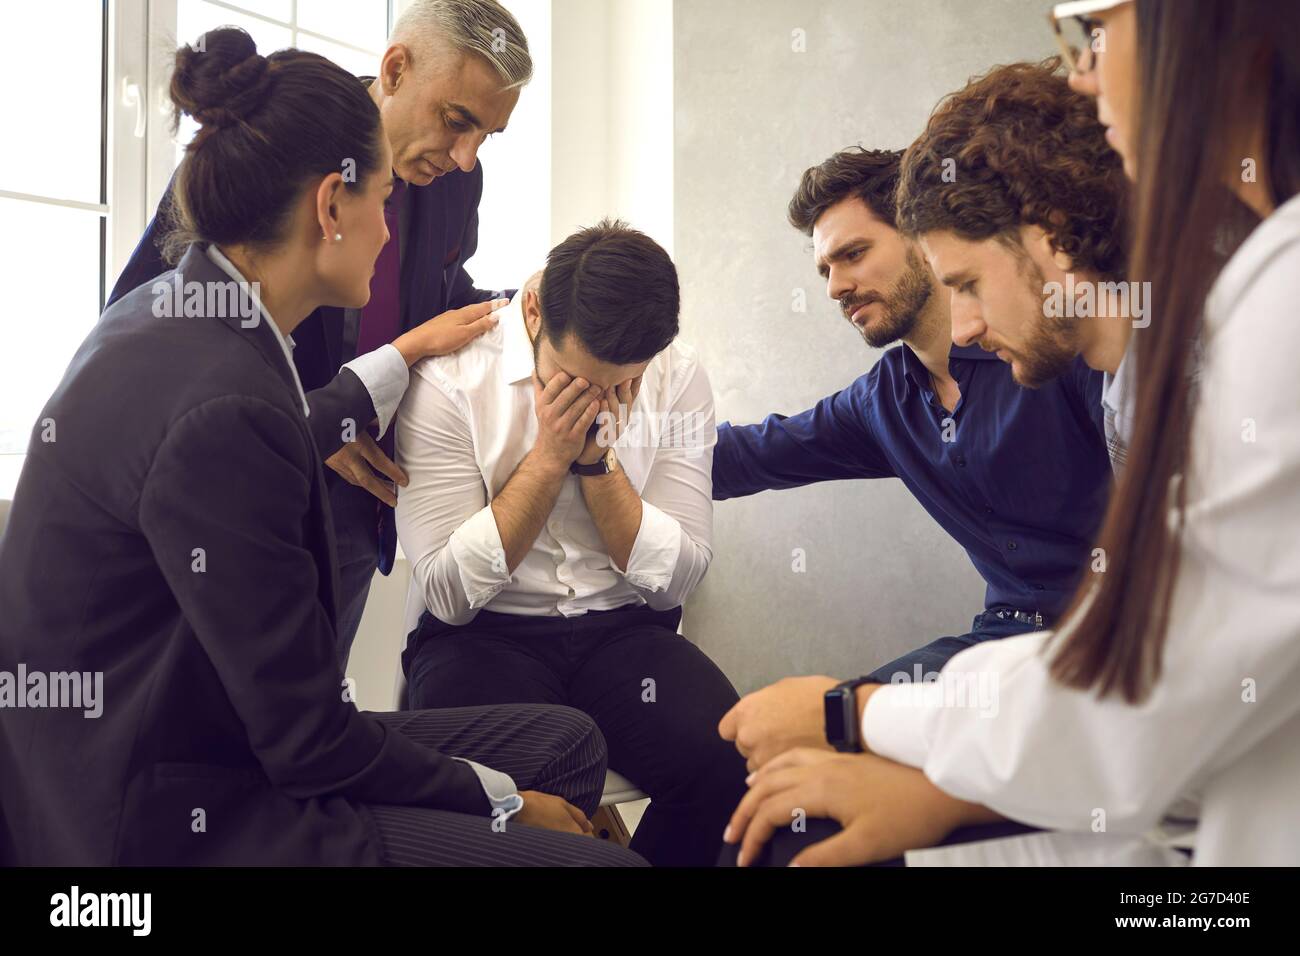 Compassionate people in group therapy comforting and supporting distraught young man Stock Photo